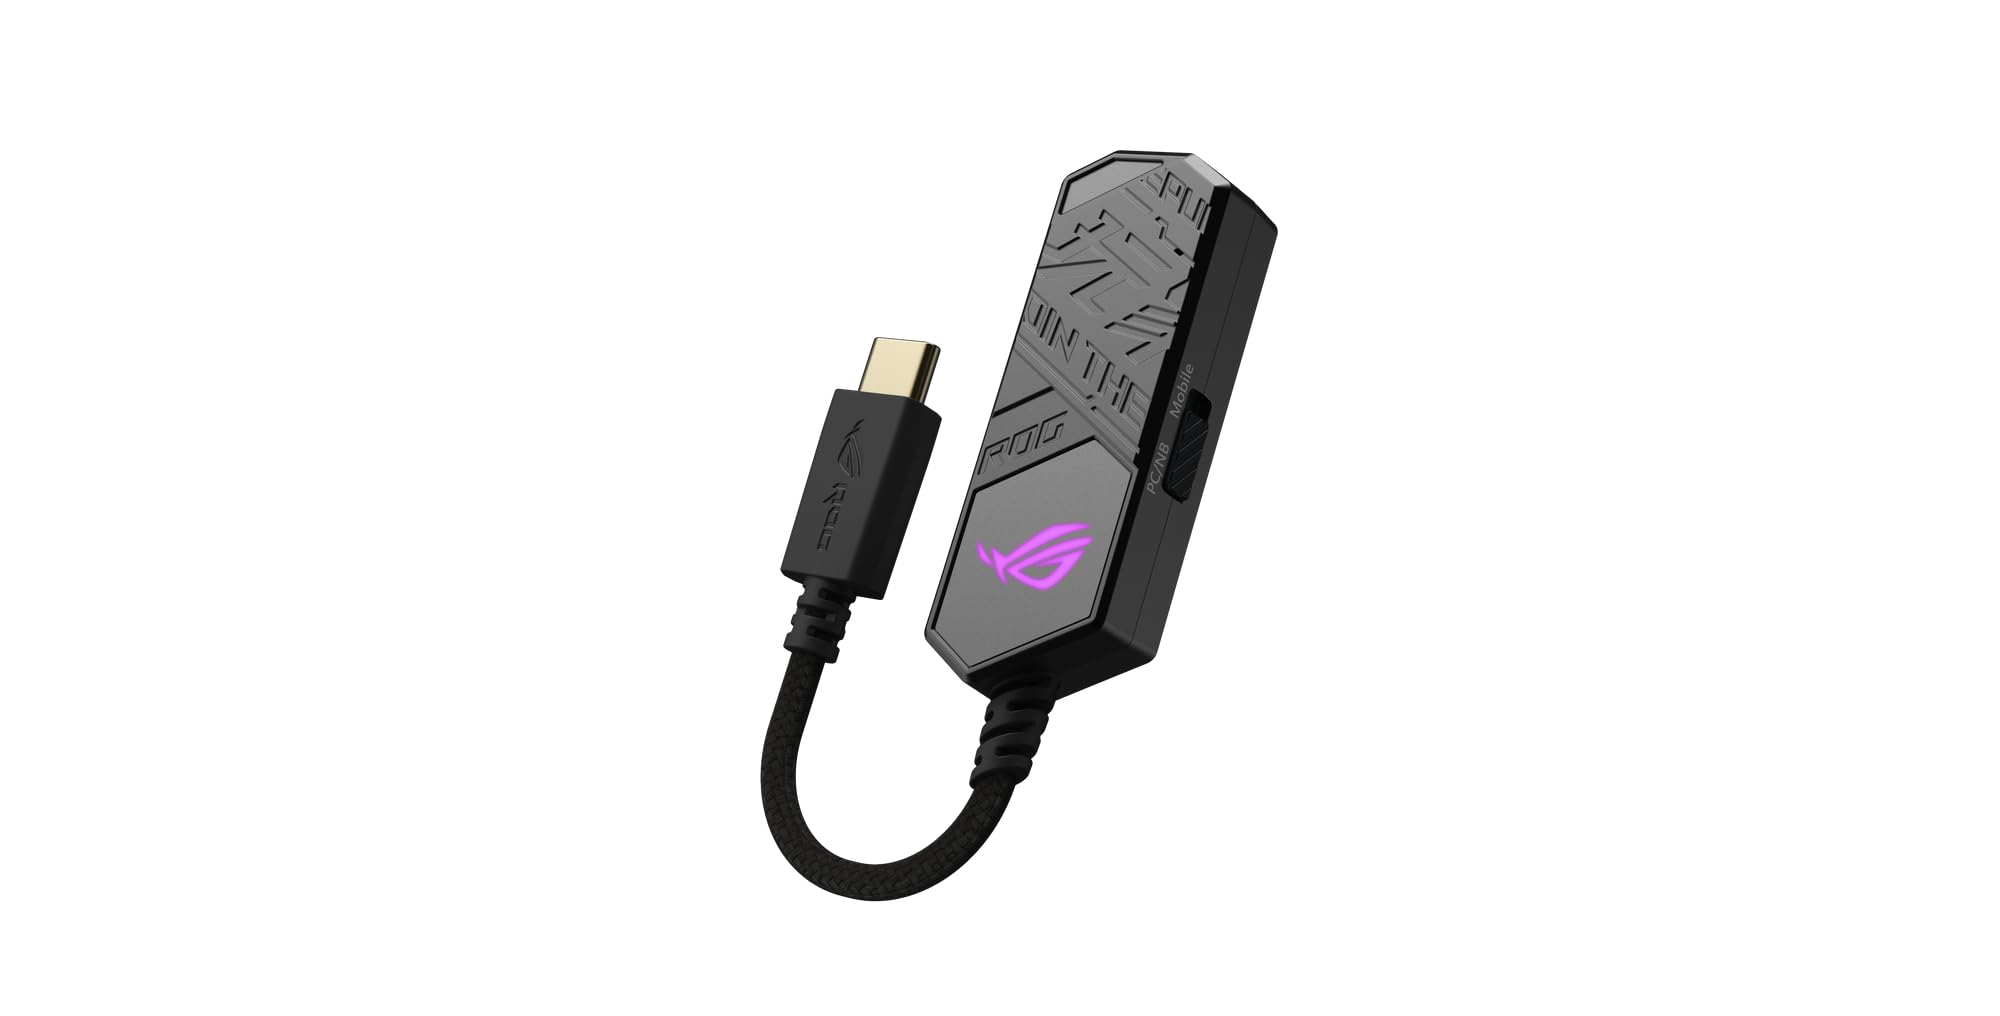 ROG Clavis USB-C to 3.5 mm Gaming DAC with AI Noise-Canceling Mic, MQA Rendering tech, ESS 9281 Quad DAC, Audio Amplifier and Aura Sync. ROG Clavis is Compatible with PCs, Mobile Devices and laptops